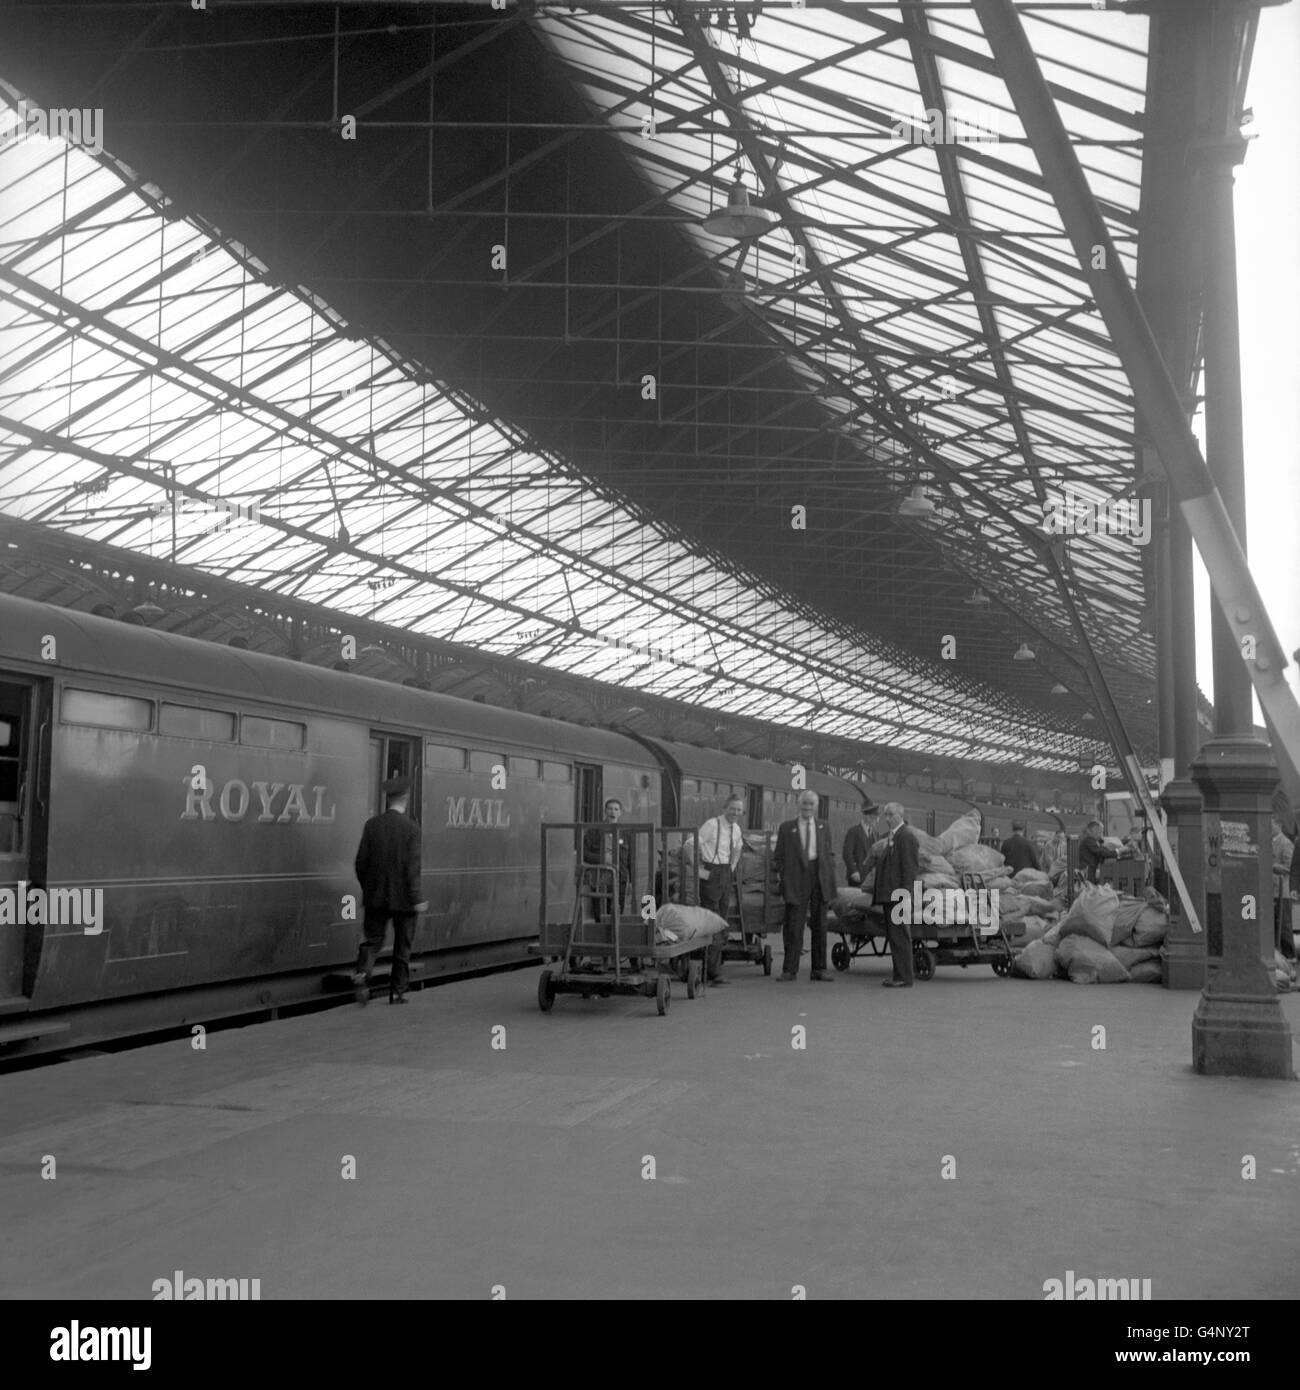 The Royal Mail train is unloaded at Euston Station, London, following a robbery this morning. The train was stopped about 3am and a large number of men stole a considerable amount of mail from the train Stock Photo